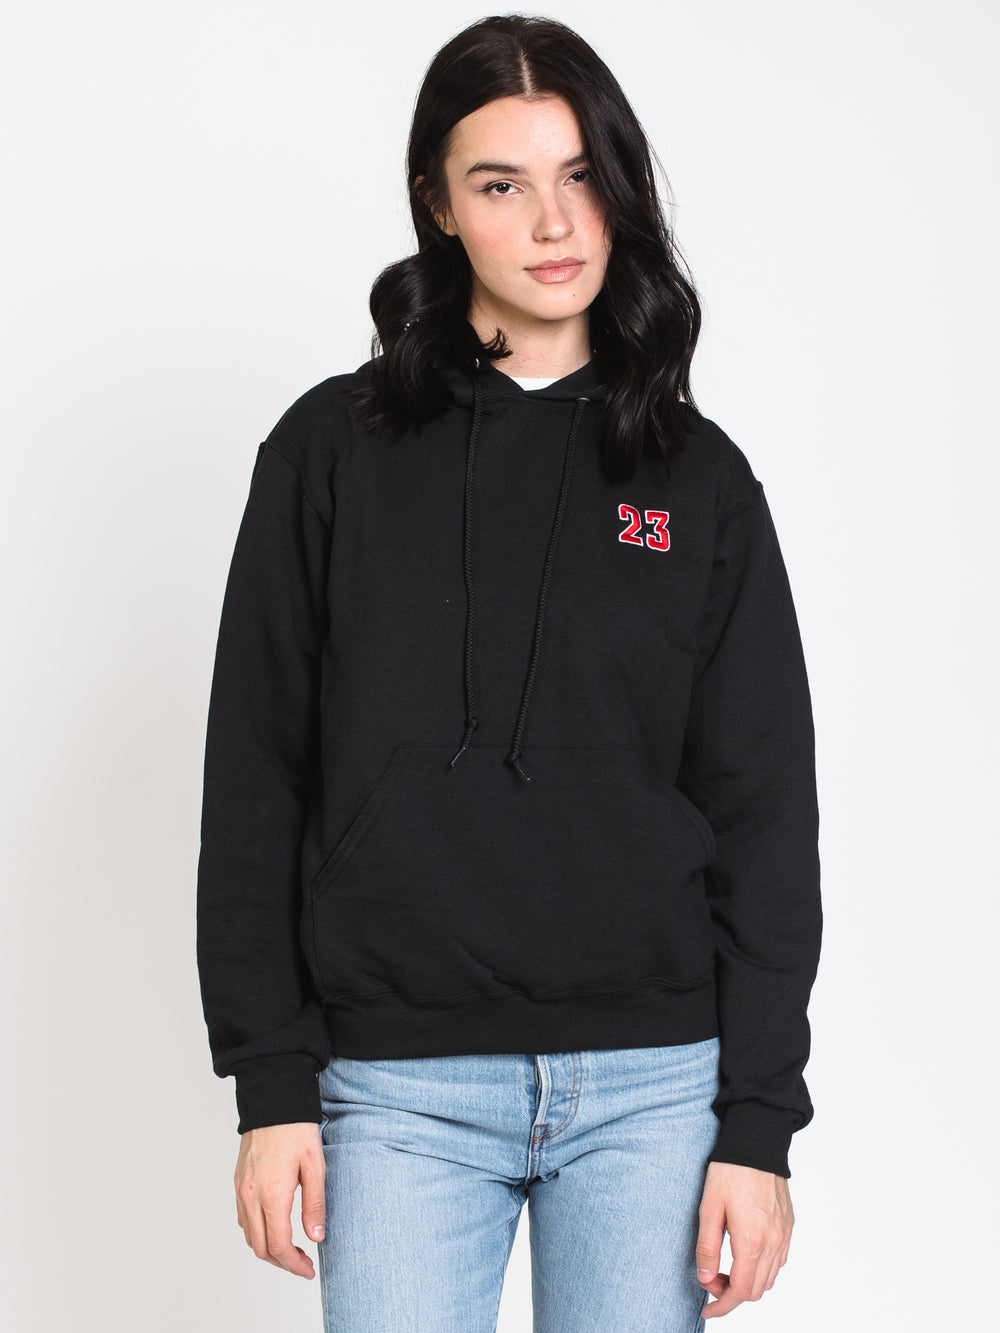 23 EMBROIDERED HOODIE - BLACK - CLEARANCE